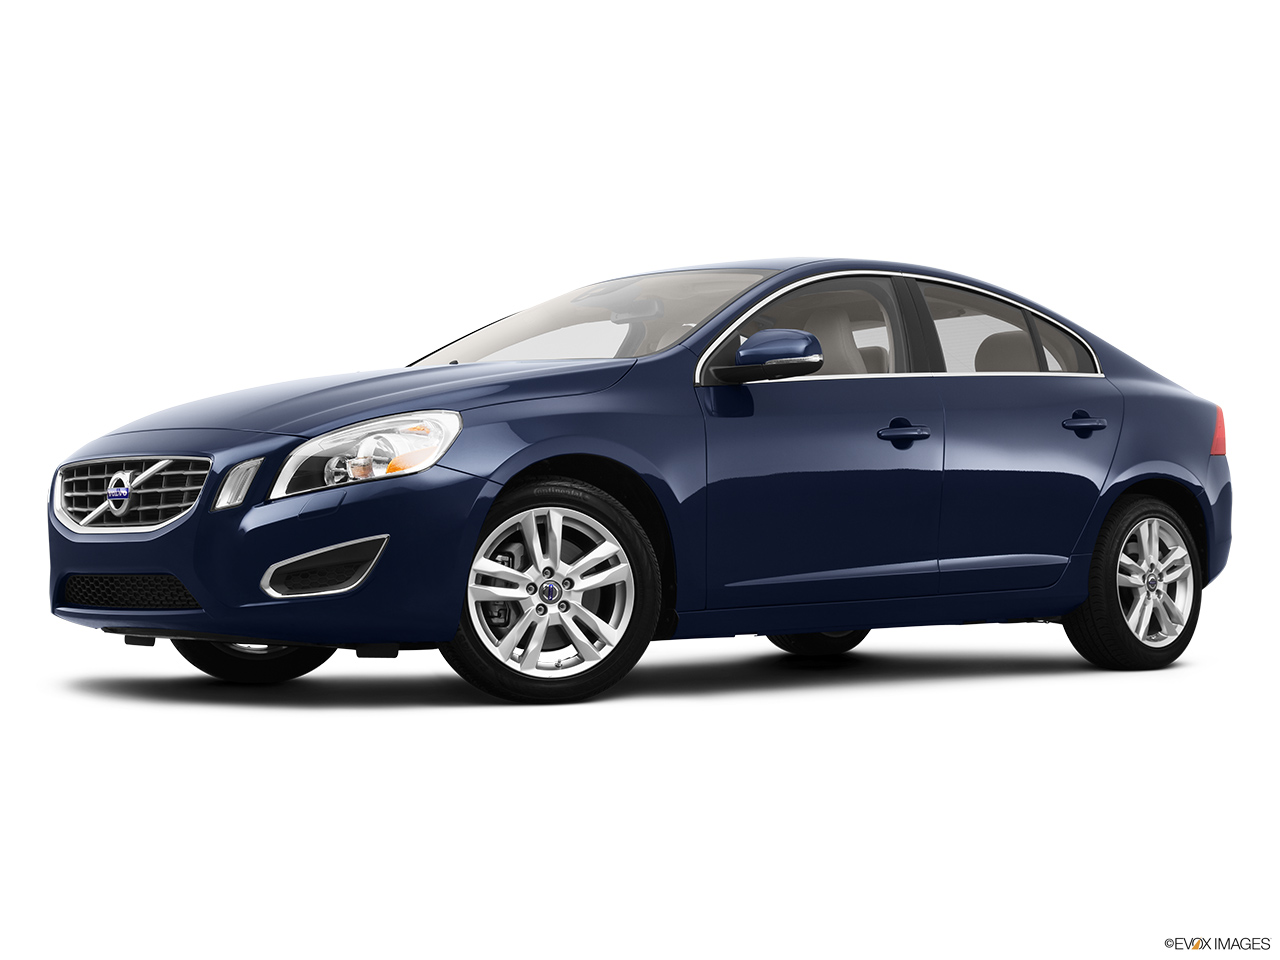 2013 Volvo S60 T5 FWD Premier Low/wide front 5/8. 